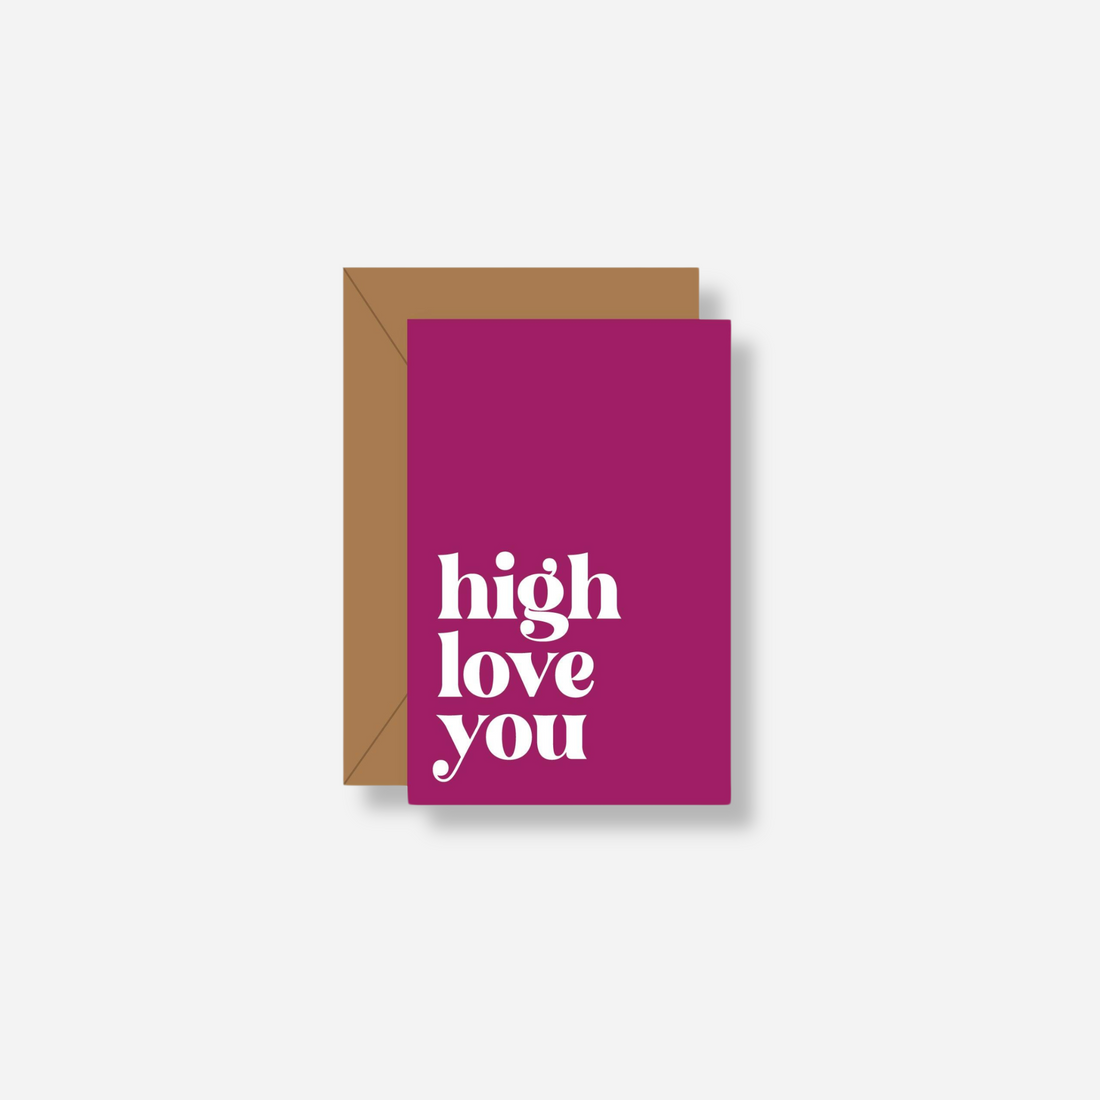 High Love You in white text on a vibrant fuchsia Tiny Card with envelope